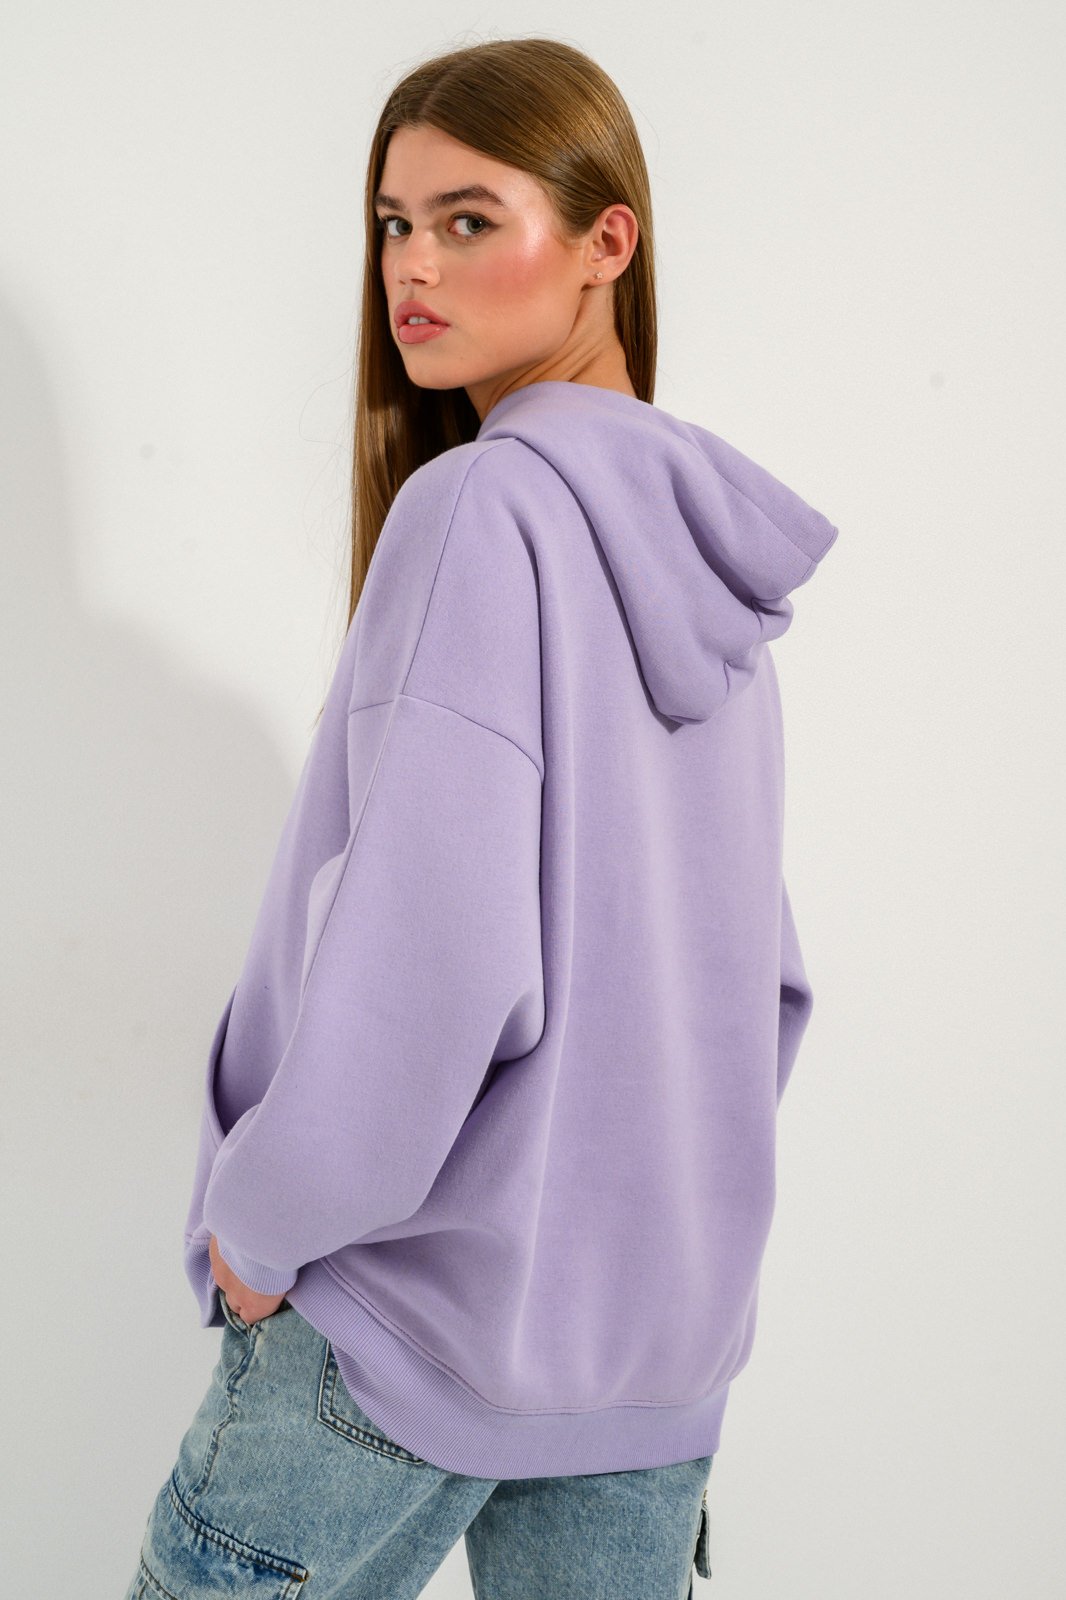 $168 NEW We Wore What Oversized Hoodie and Shorts SET Lilac XS S M L